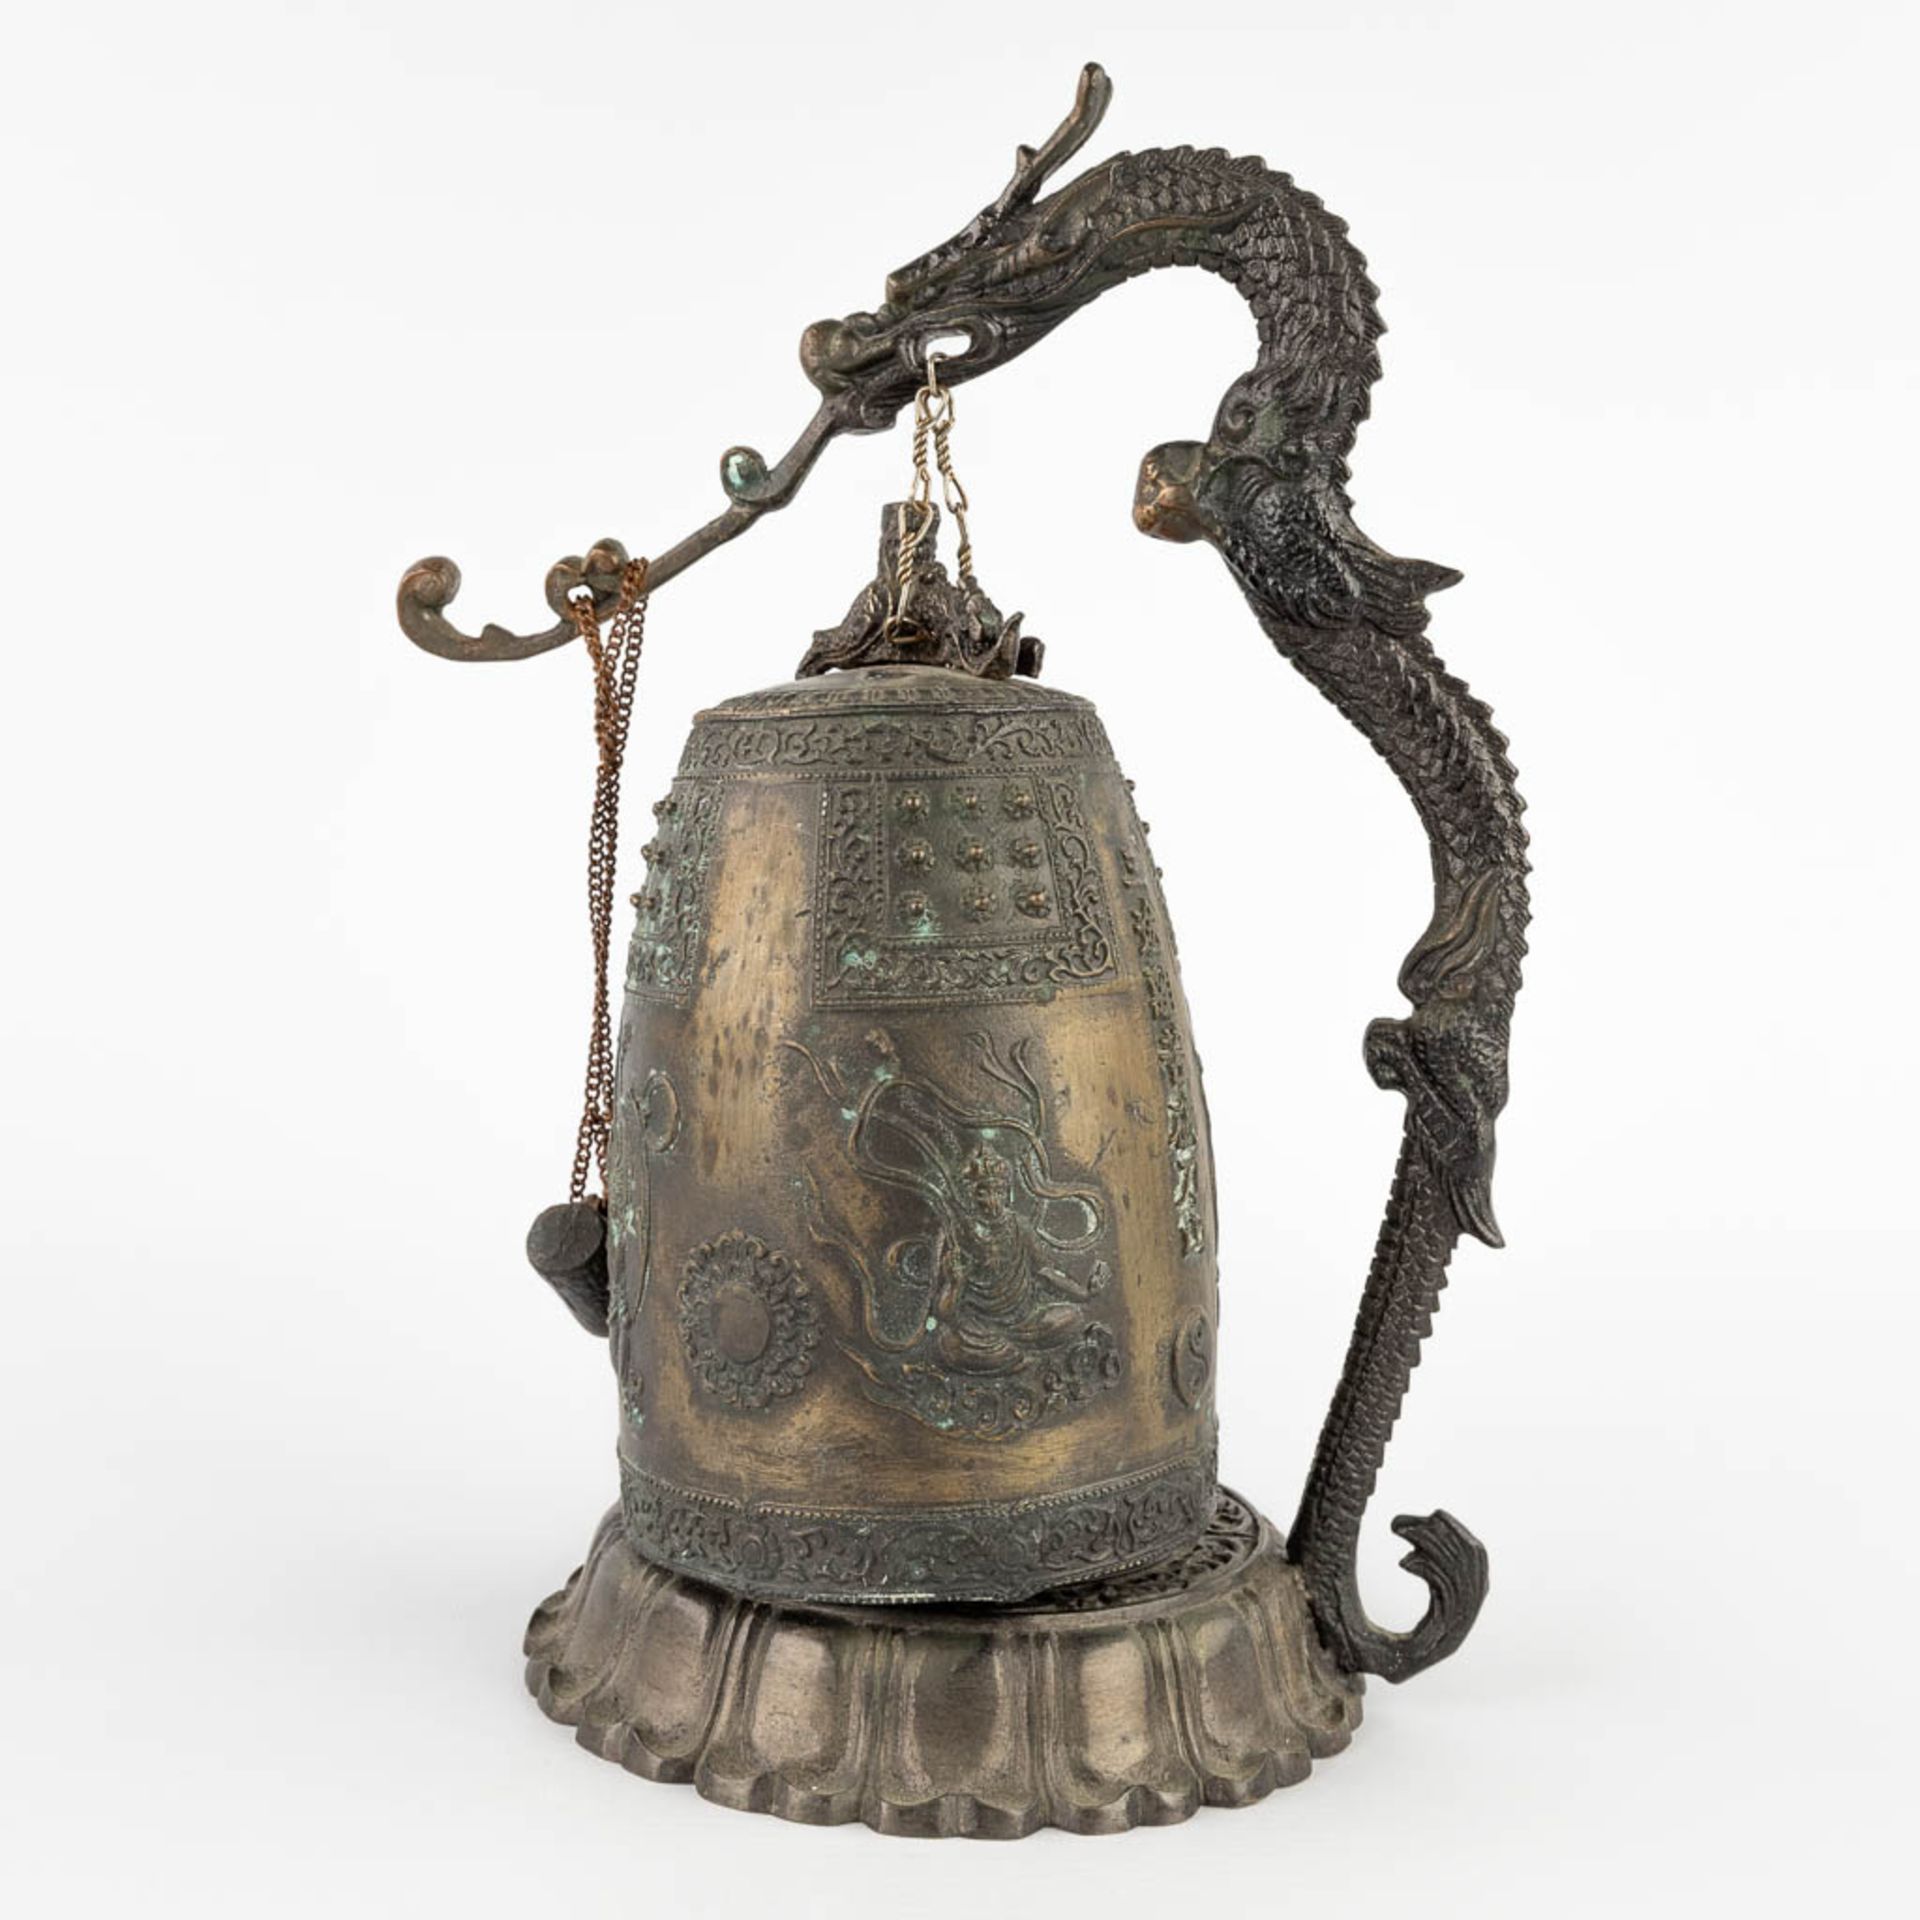 3 bells and a gong, Oriental. 19th/20th C. (L:13 x W:47 x H:55 cm) - Image 13 of 28